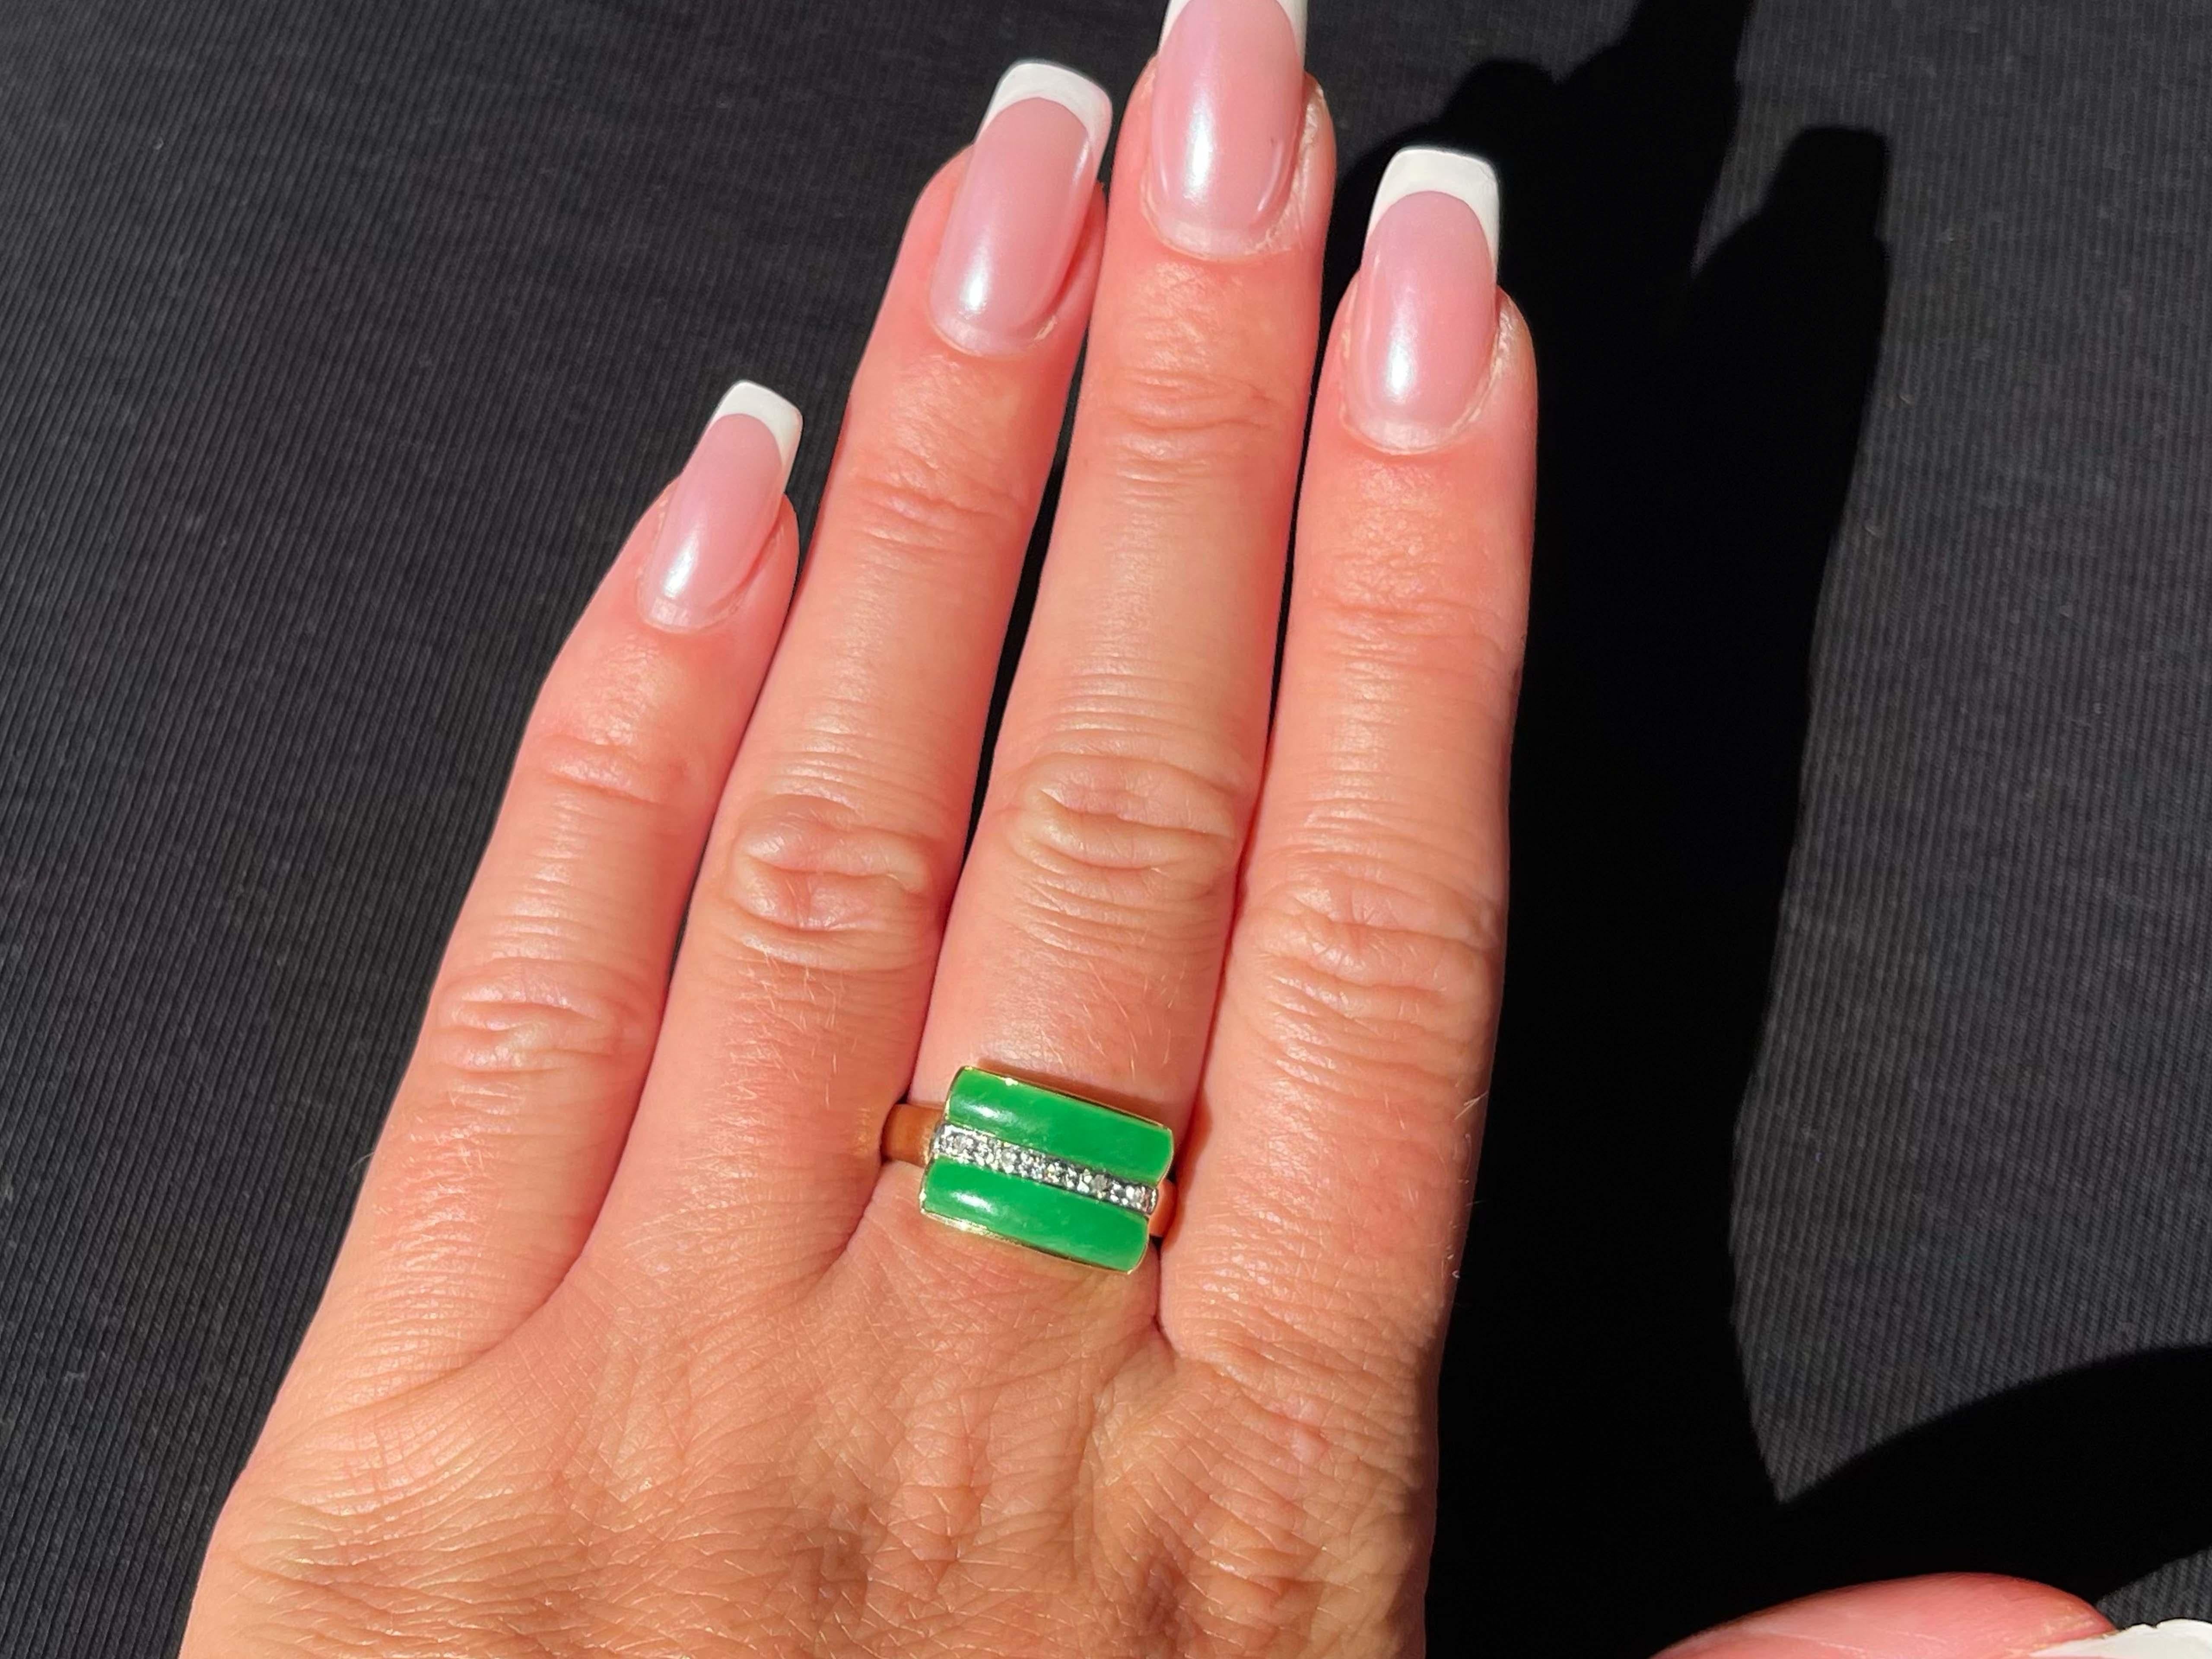 Item Specifications:

Metal: 14K Yellow Gold 

Style: Statement Ring

Ring Size: 7.75 (resizing available for a fee)

Total Weight: 2.9 Grams

Gemstone: Jadeite Jade

Ring Measurements: 15 mm x 10 mm 

Diamond Count: 5 round brilliant 

Condition: